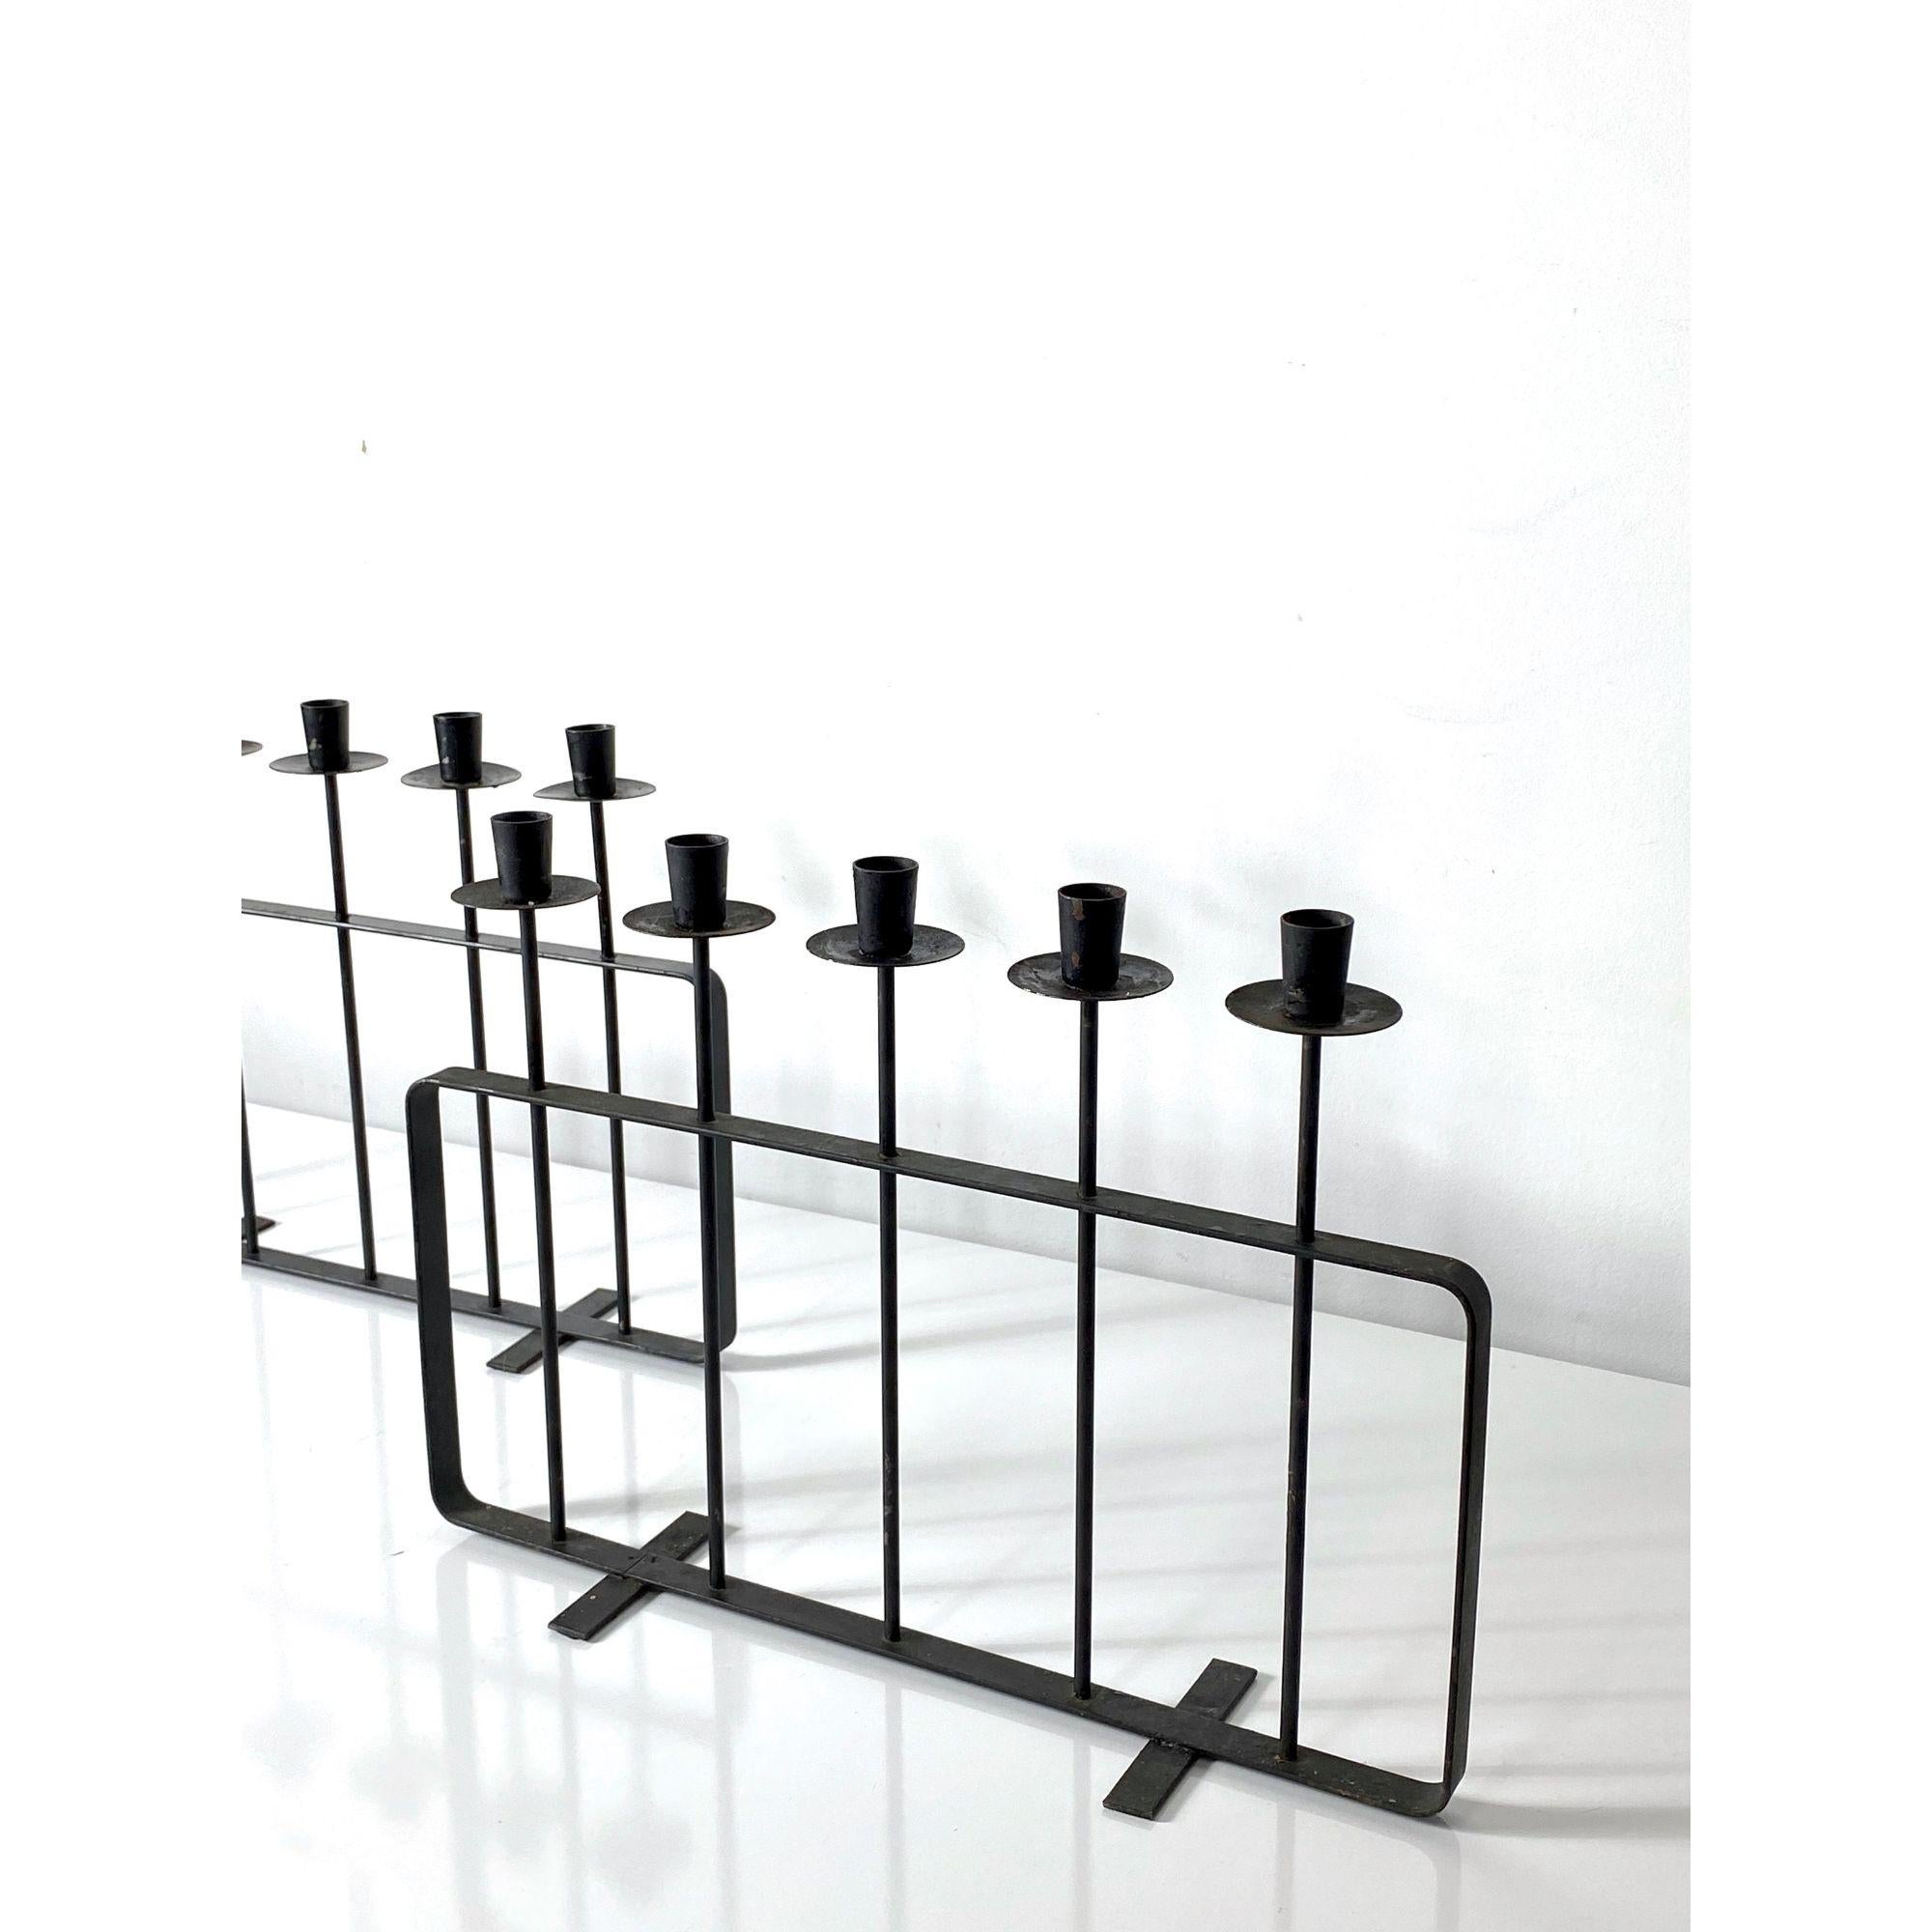 Mid Century Modern Ravenware Iron Candelabras by Richard Galef, circa 1950s In Good Condition For Sale In Troy, MI